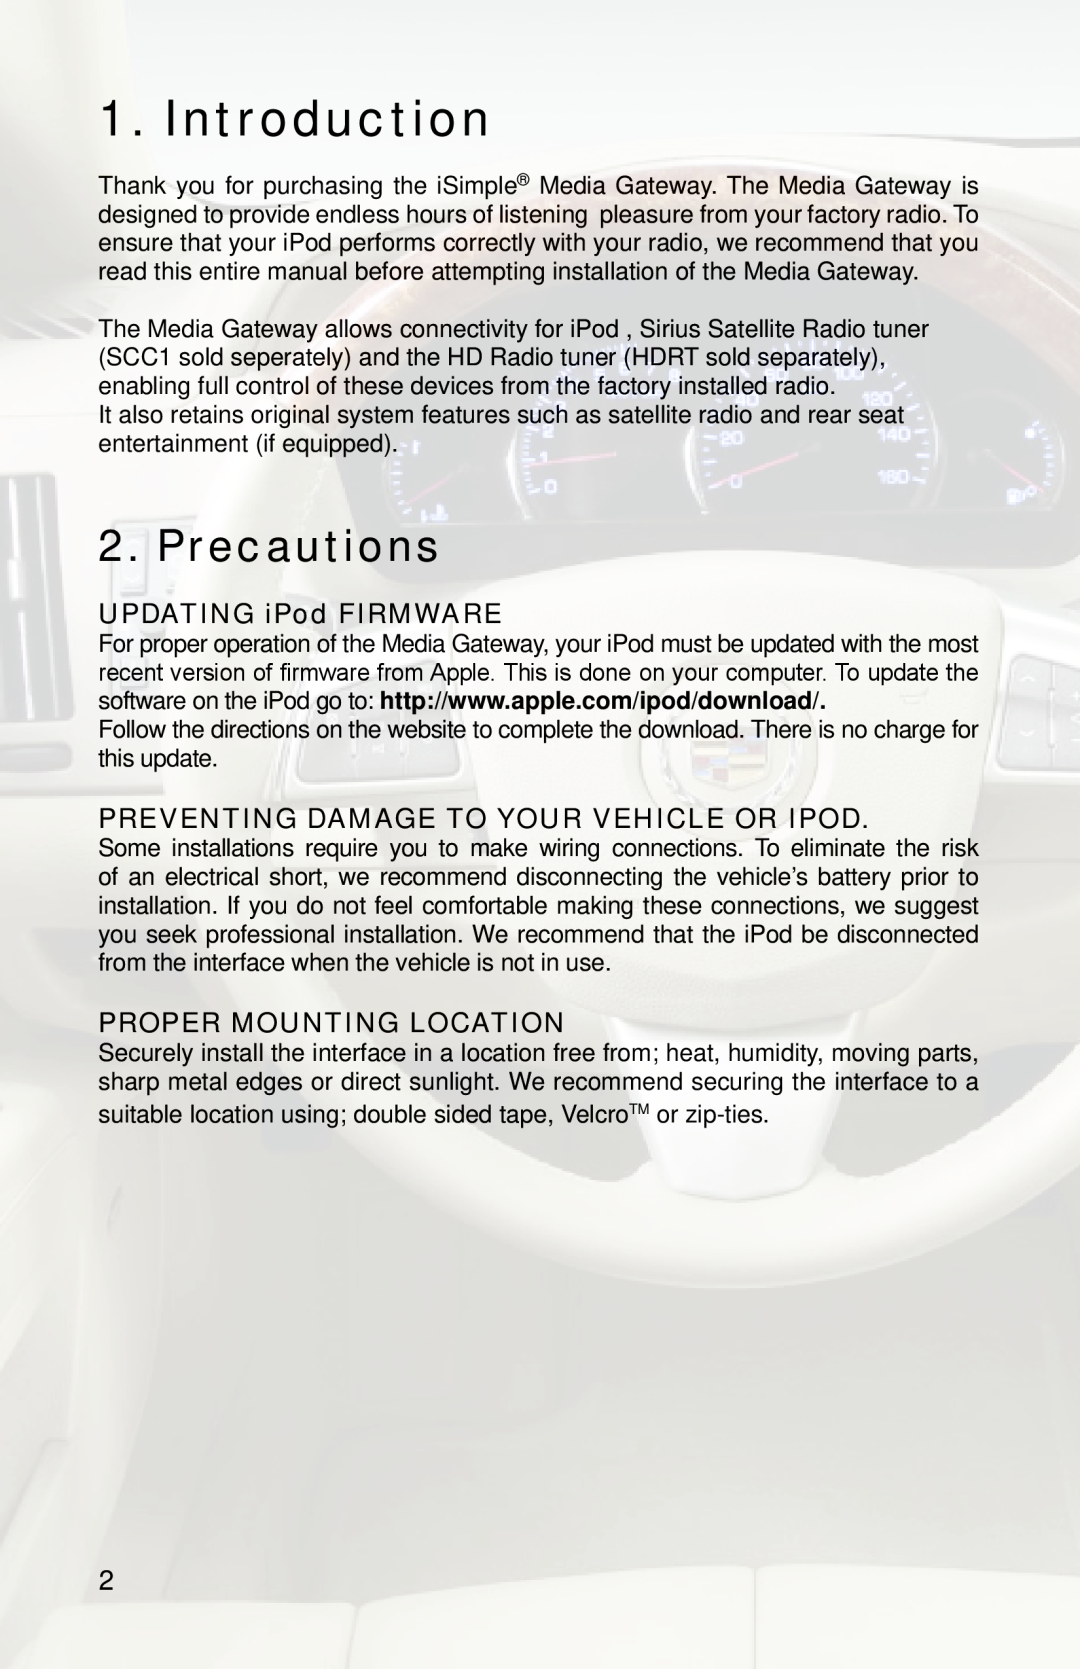 iSimple PGHGM4 owner manual Introduction, Precautions, UPDATING iPod FIRMWARE, PREVENTING DAMAGE TO YOUR VEHICLE OR iPod 